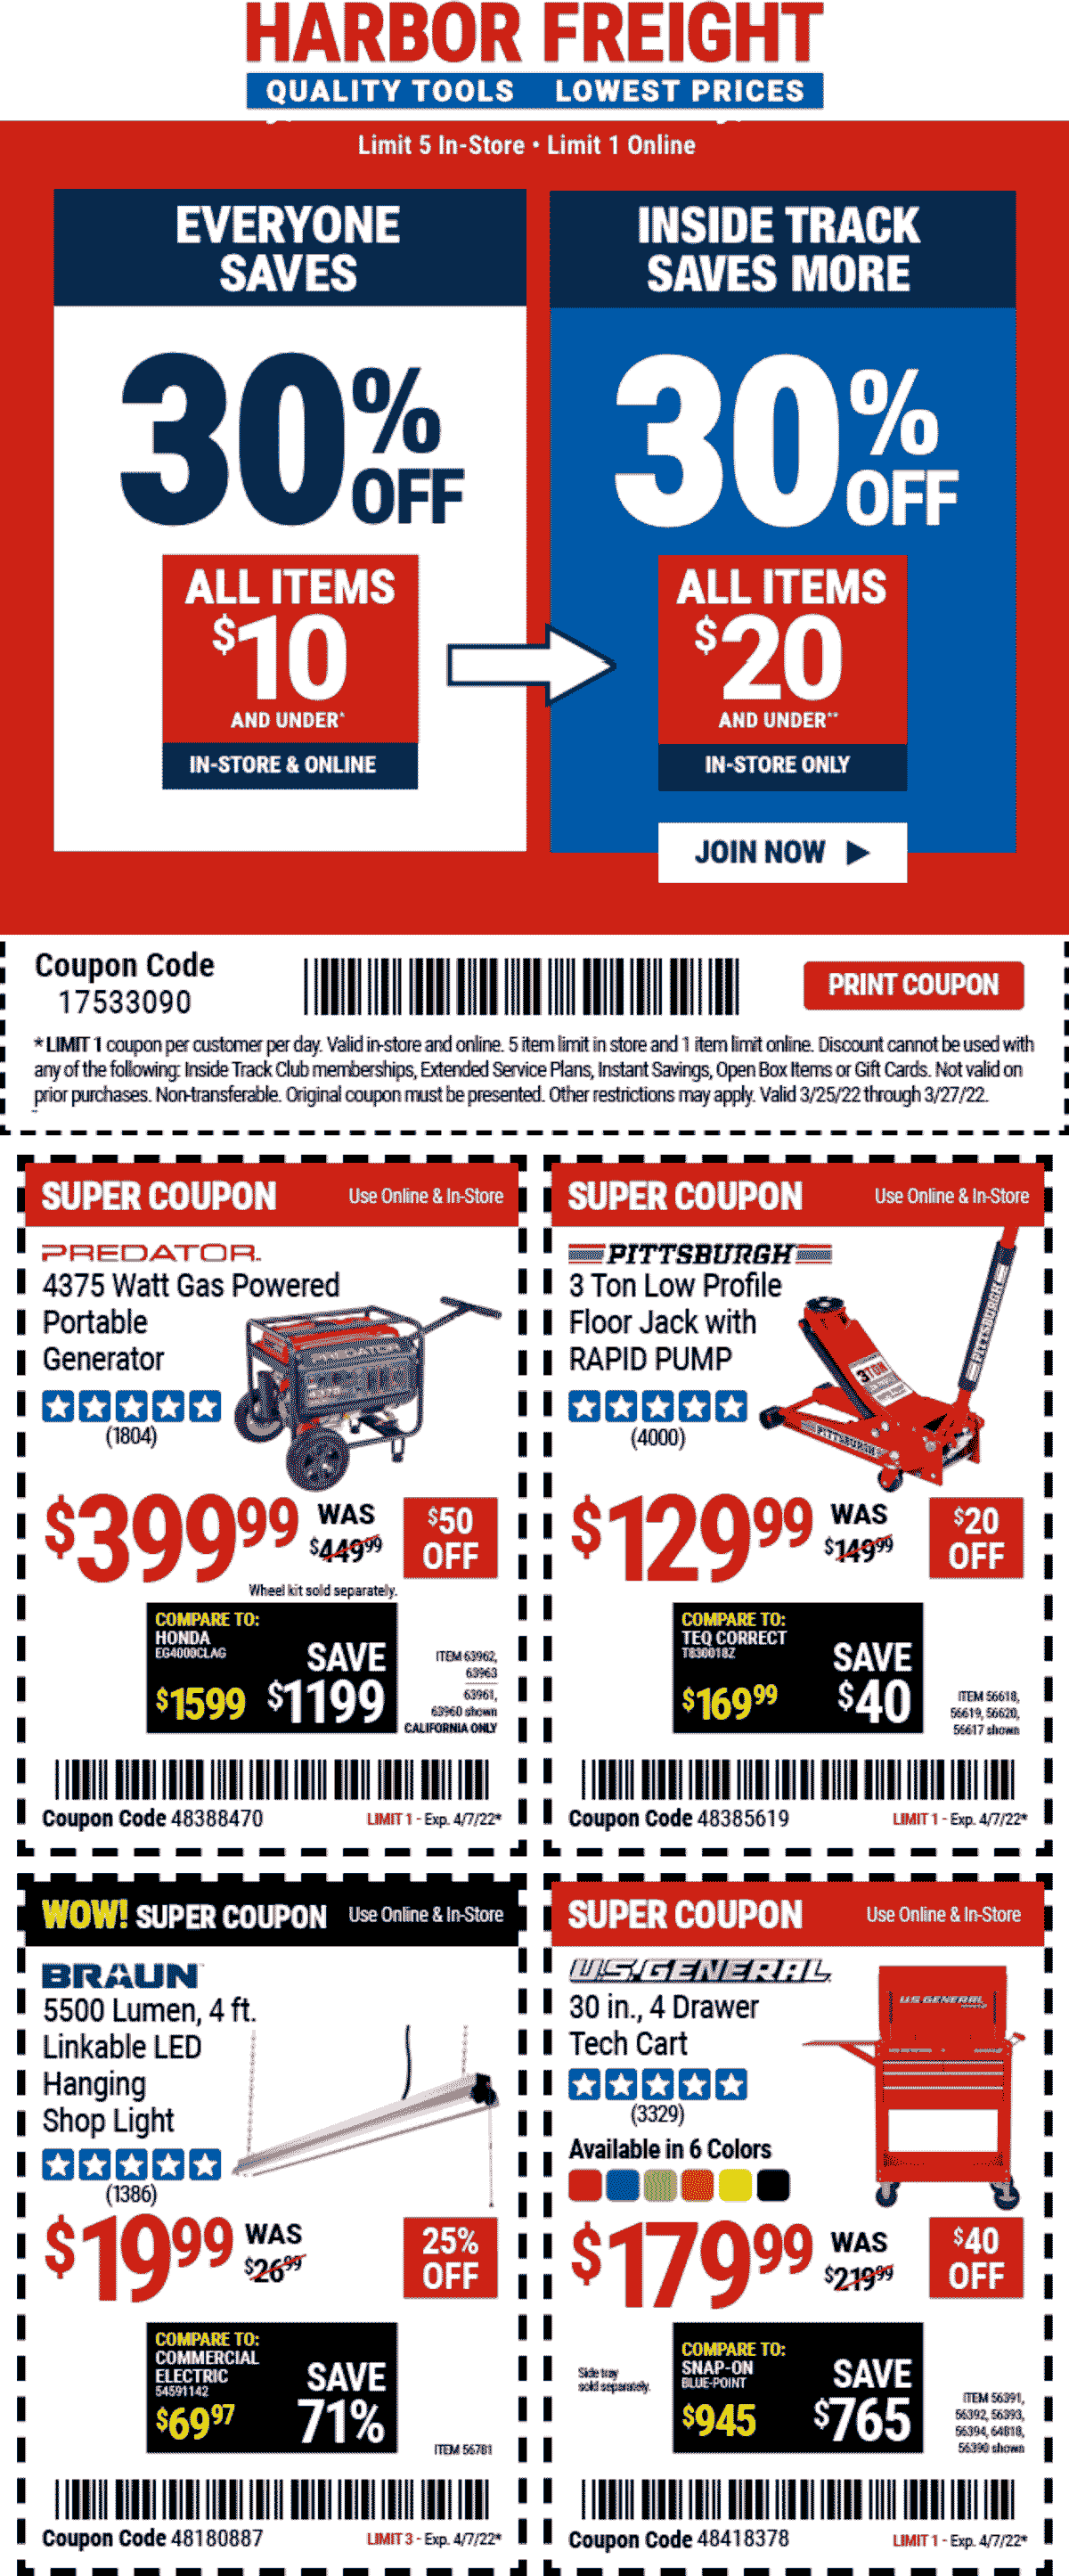 Harbor Freight Tools coupons & promo code for [November 2022]